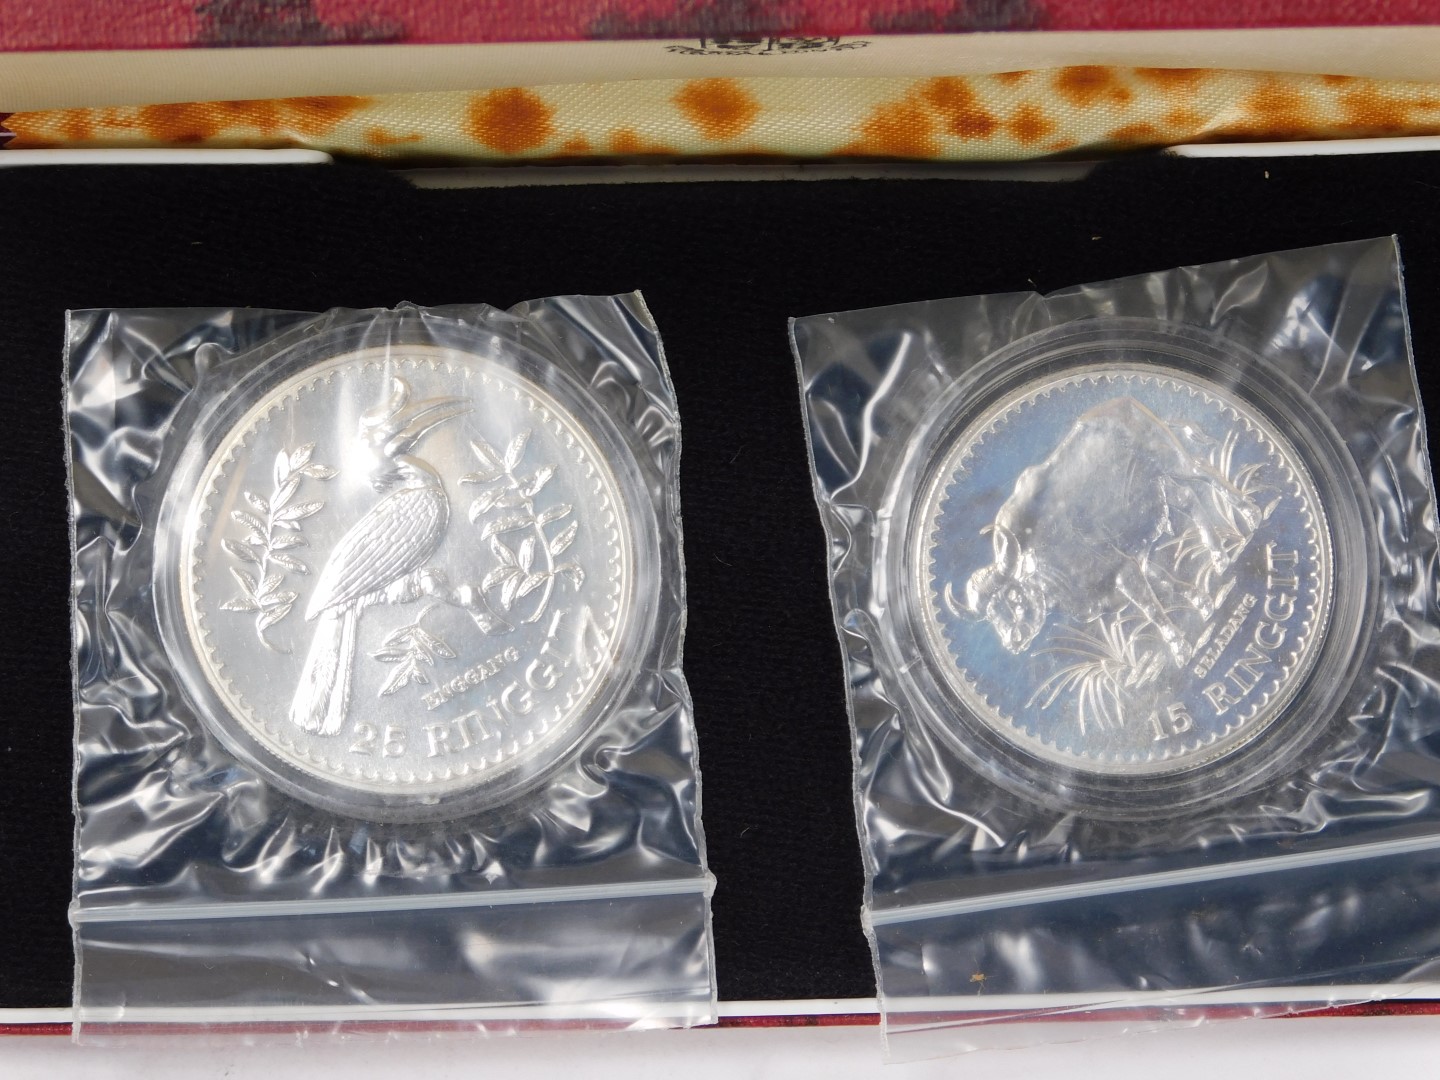 Two cased sets of silver proof Malaysian coins, issued by The Royal Mint, dated 1976, 25 Ringgit and - Image 2 of 2